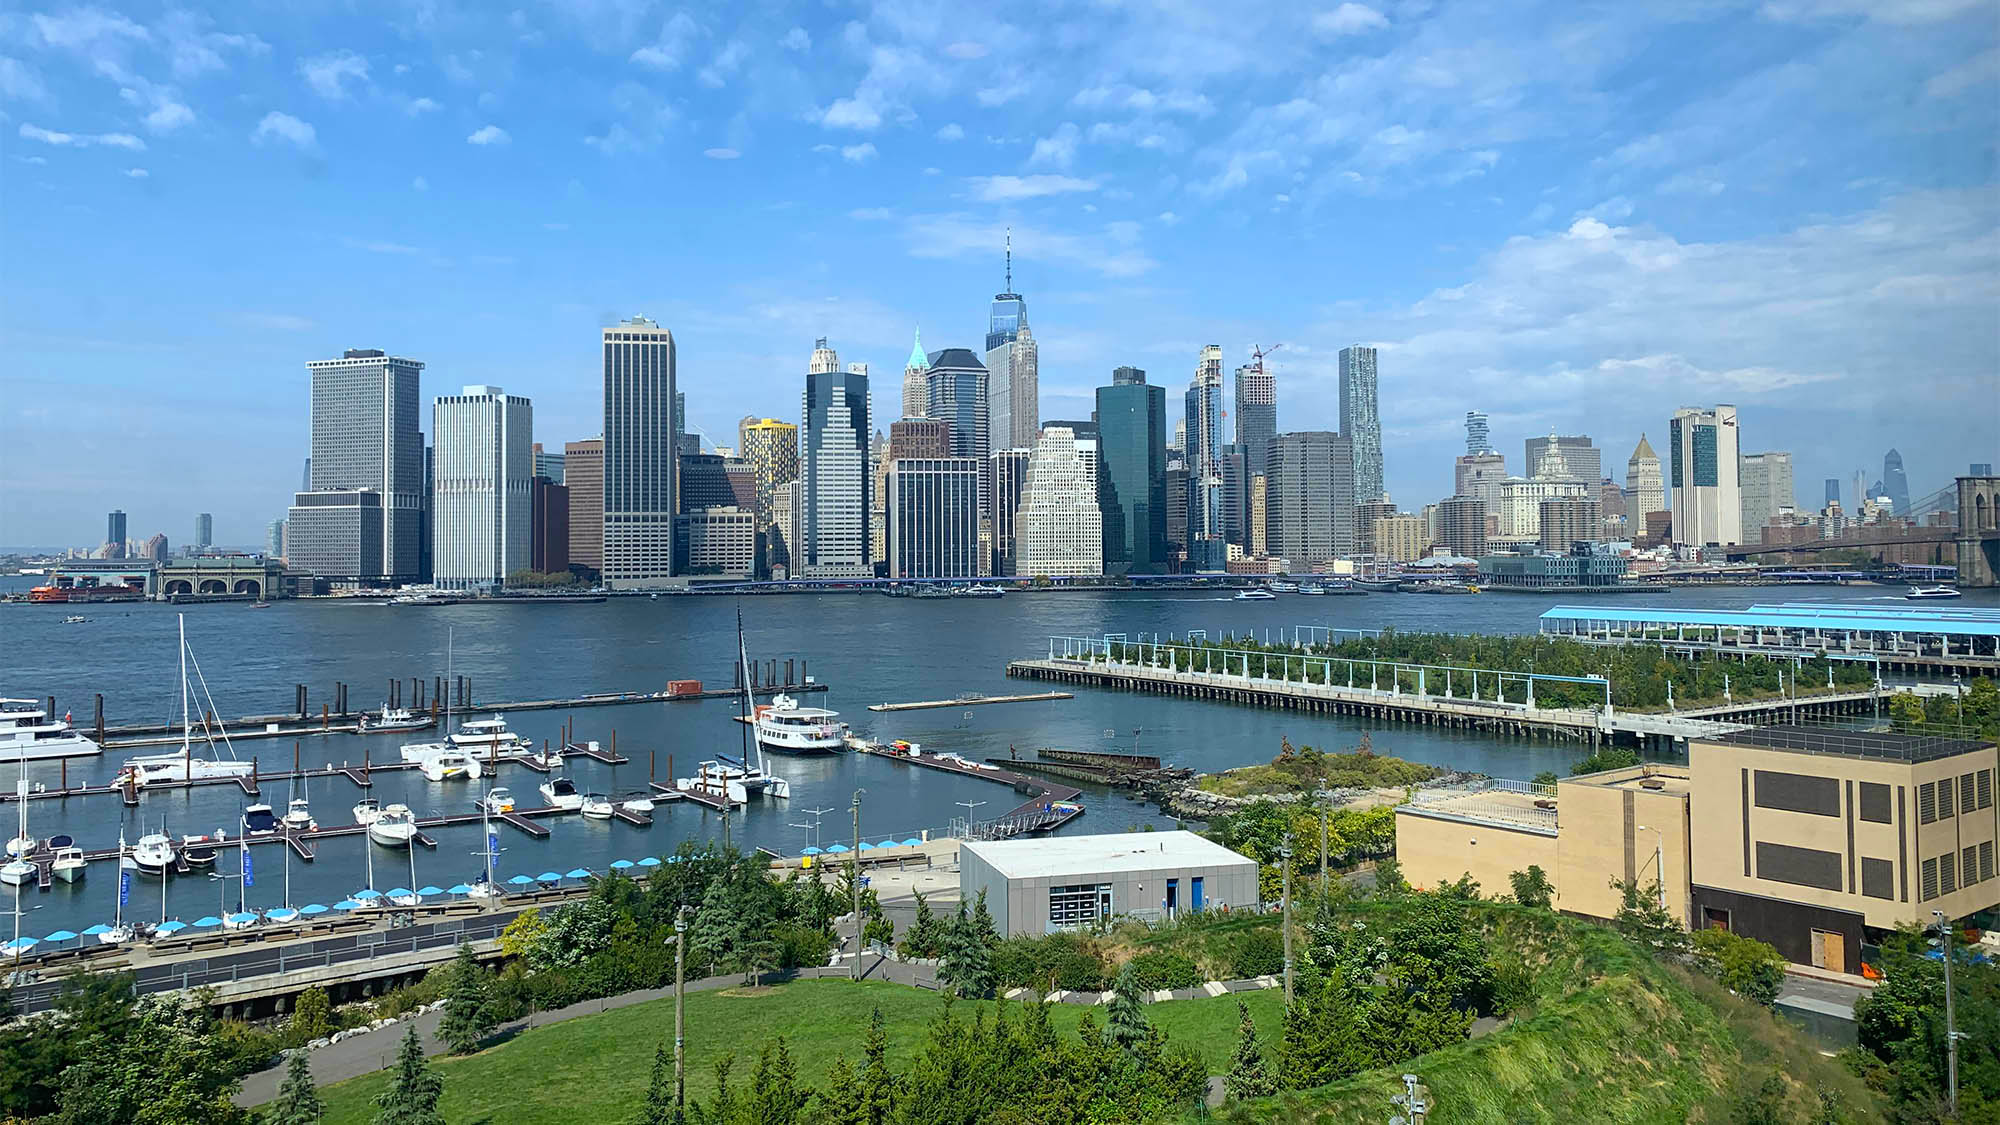 Manhattan NYC waterfront and East River with Brooklyn pier and greenery in foreground